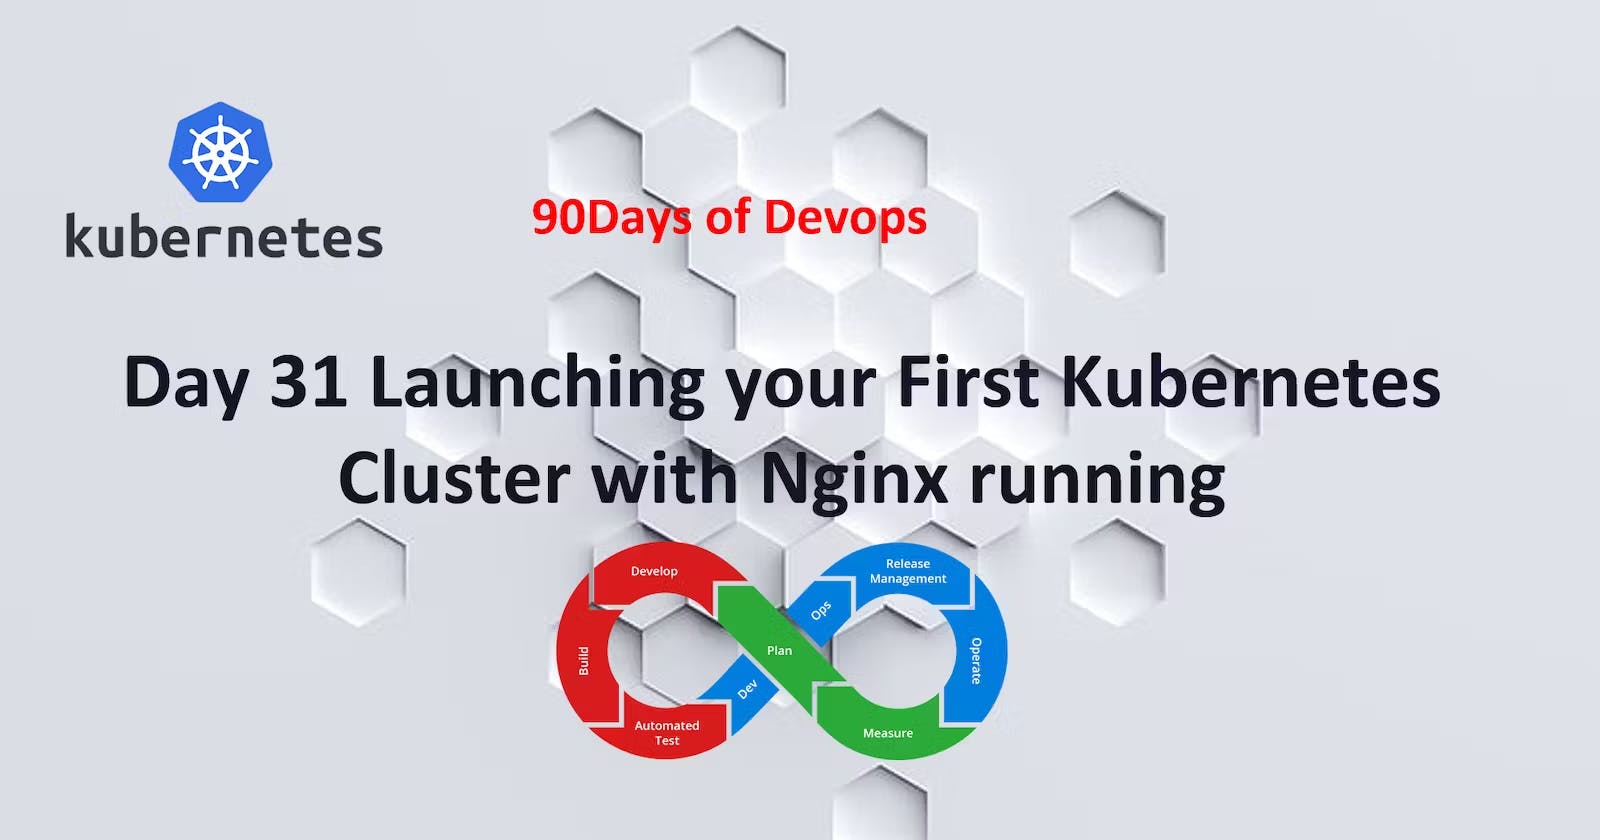 Day 31 Task: Launching your First Kubernetes Cluster with Nginx running